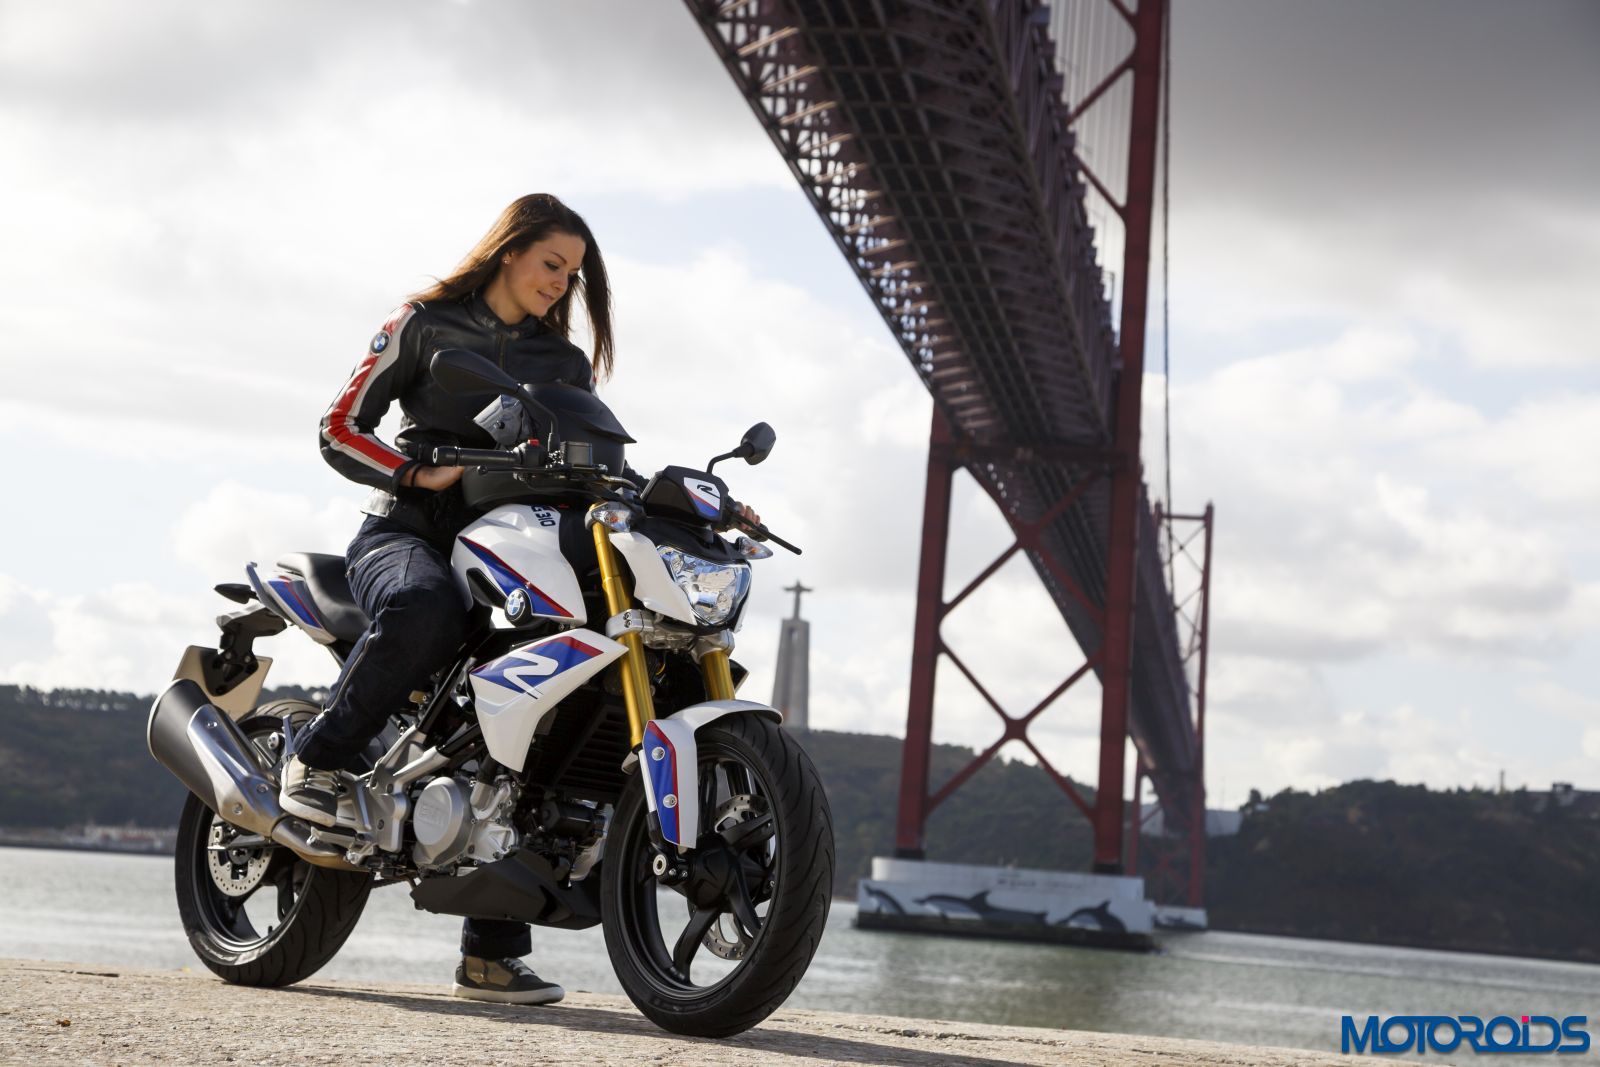 BMW G 310 R instrument cluster, colour options and technical